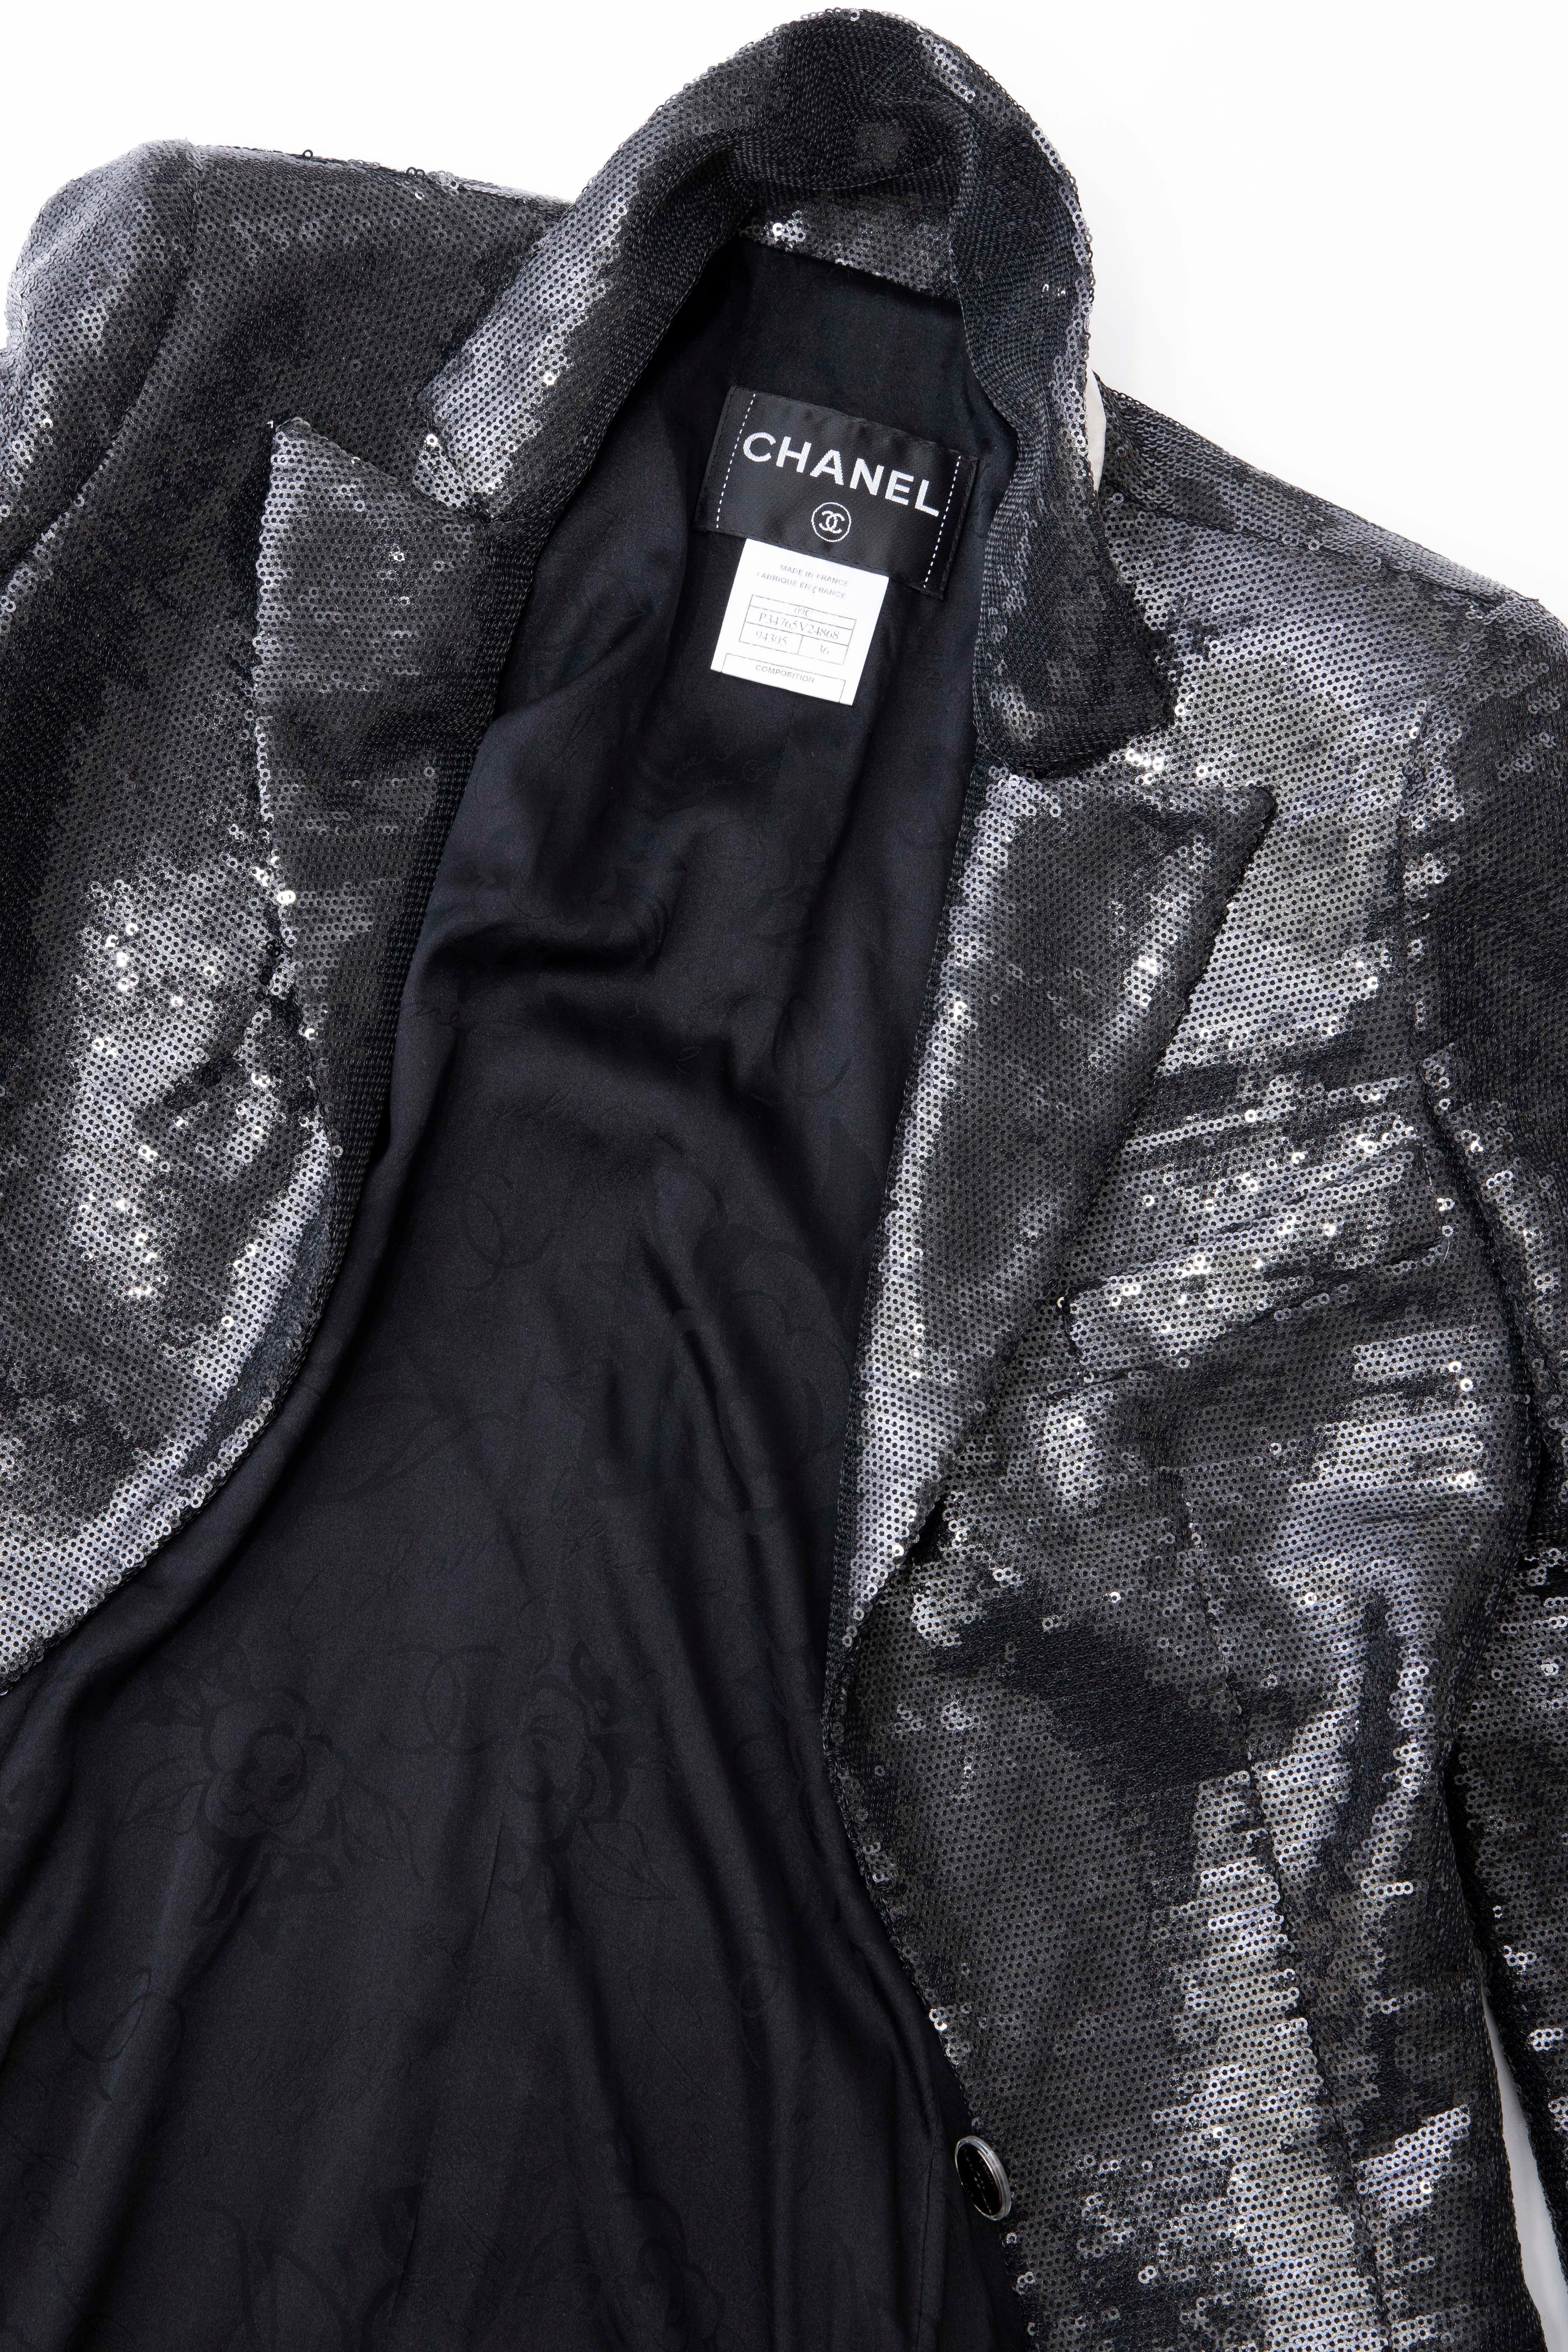 Chanel Black Embroidered Sequin Evening Jacket Ivory Silk Cuffs, Cruise 2009 For Sale 9